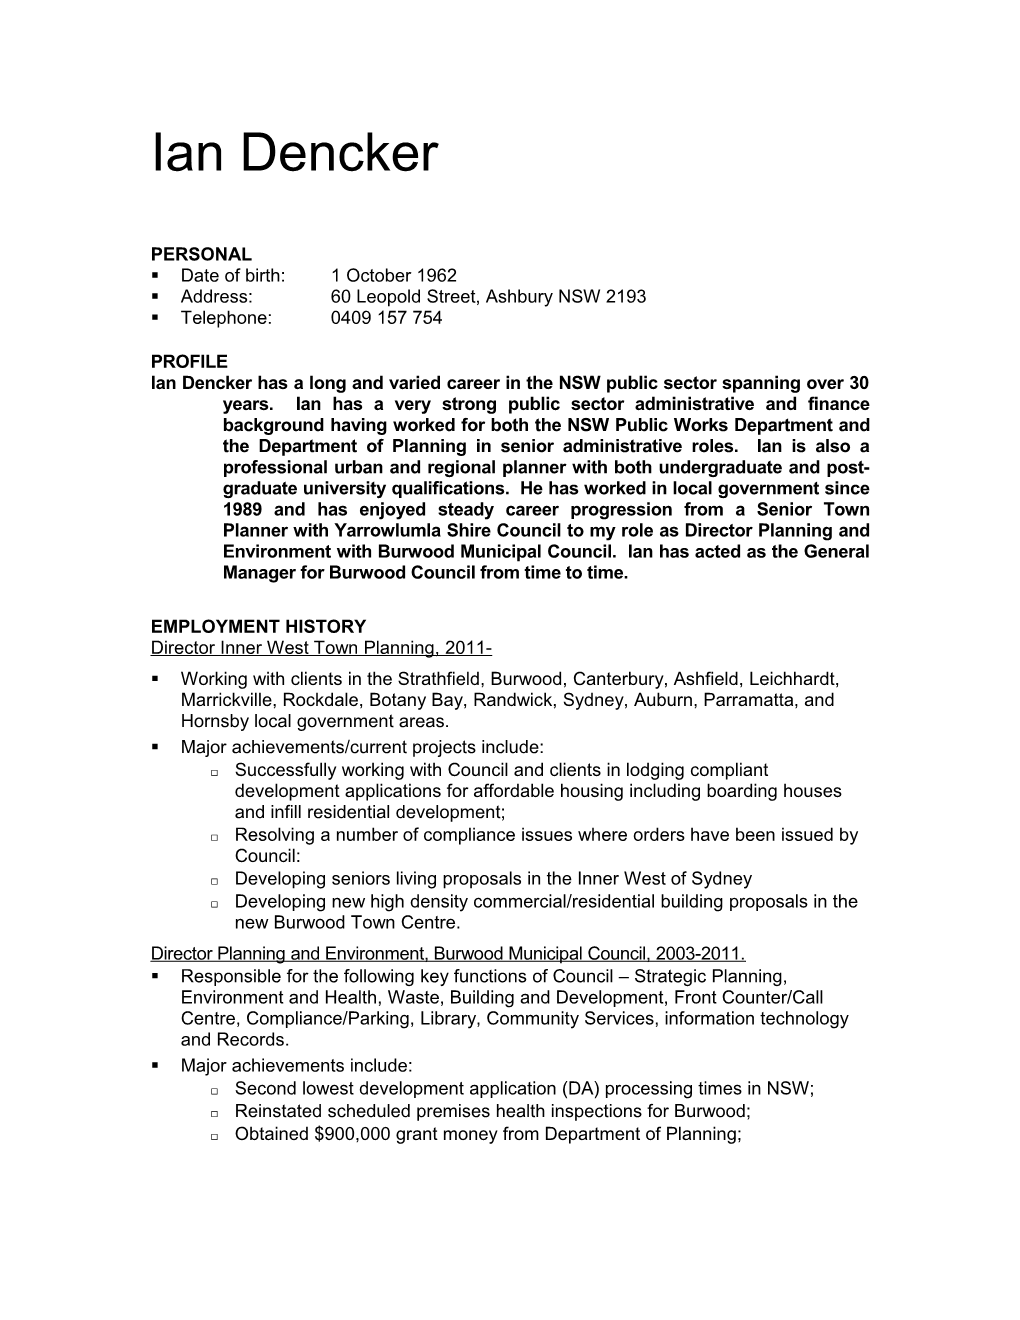 Ian Dencker Has a Long and Varied Career in the NSW Public Sector Spanning Over 30 Years